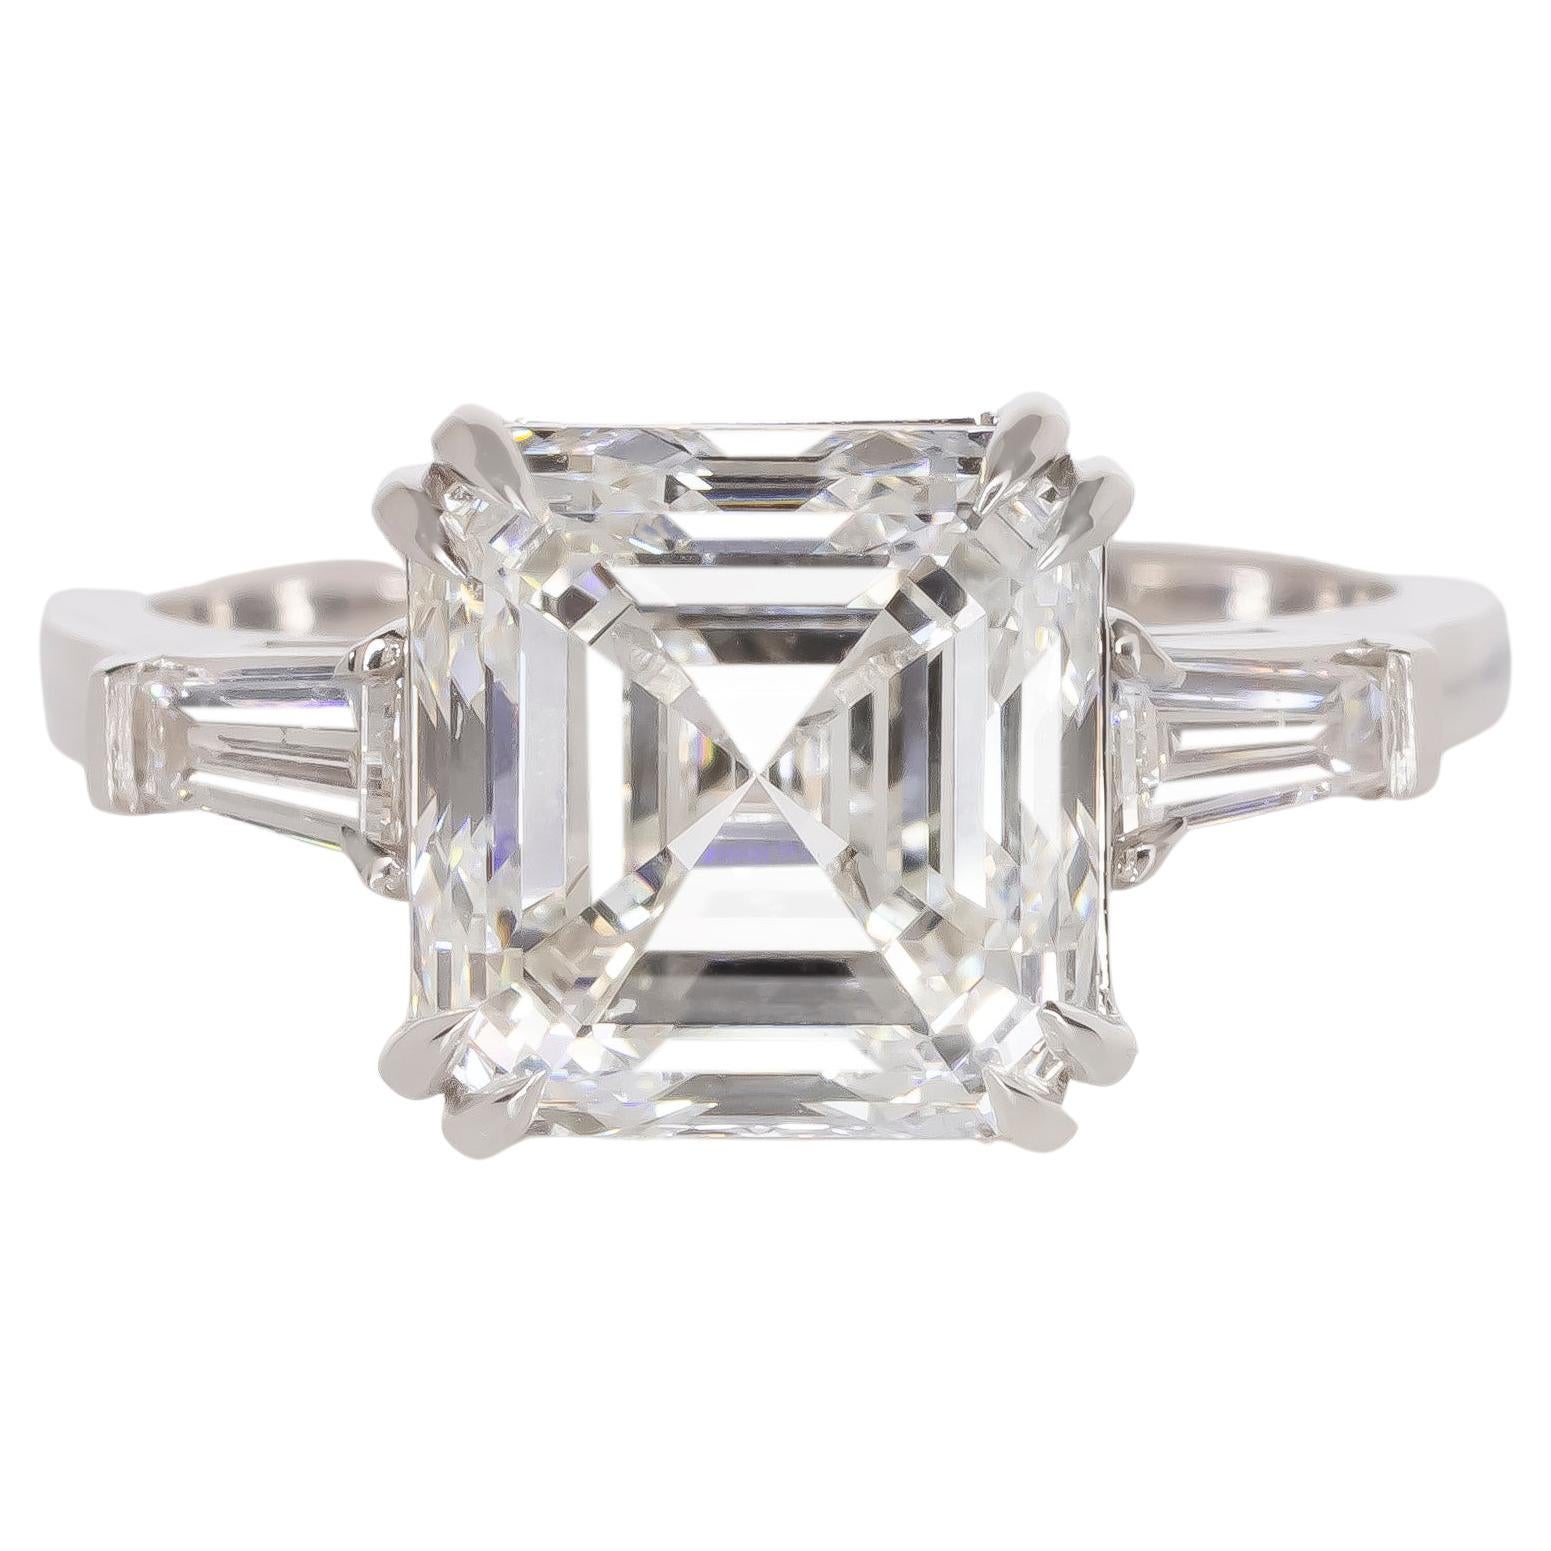 Exceptional GIA Certified 4 Carat Emerald Cut Diamond Ring VVS2 Clarity